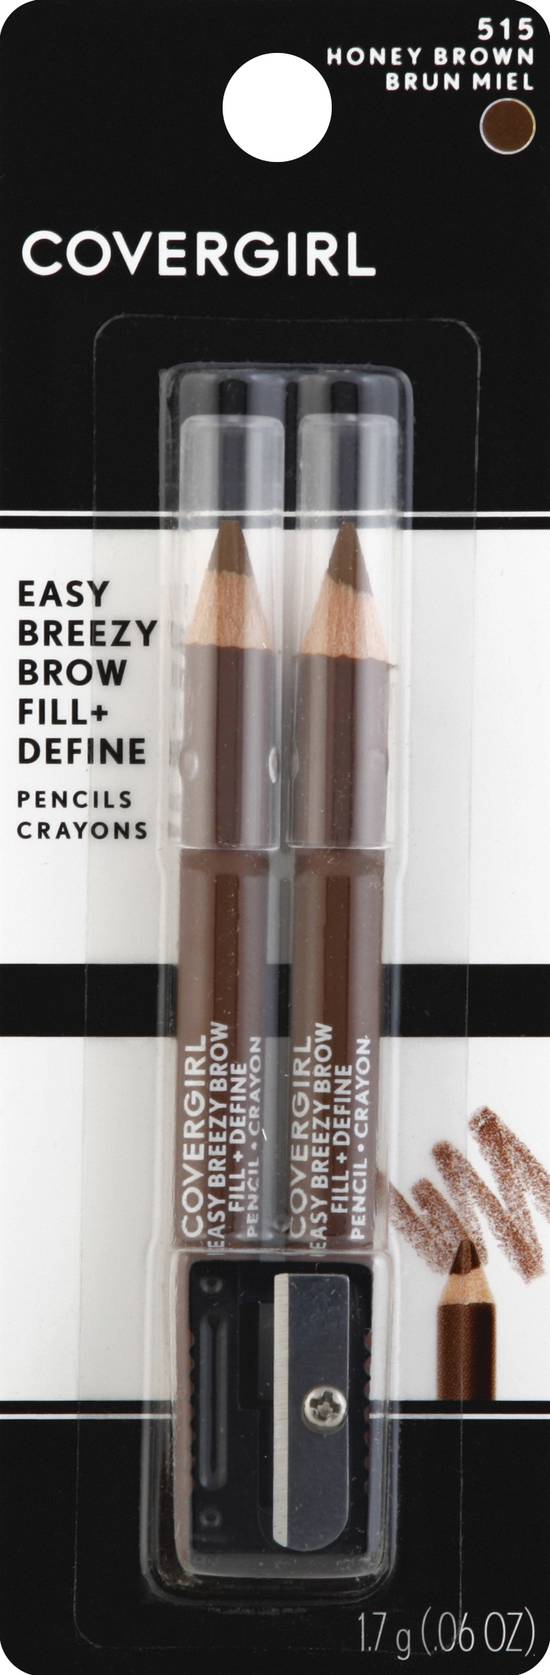 Covergirl Honey Brown 515 Brow Shaper and Eyeliner (2 ct)